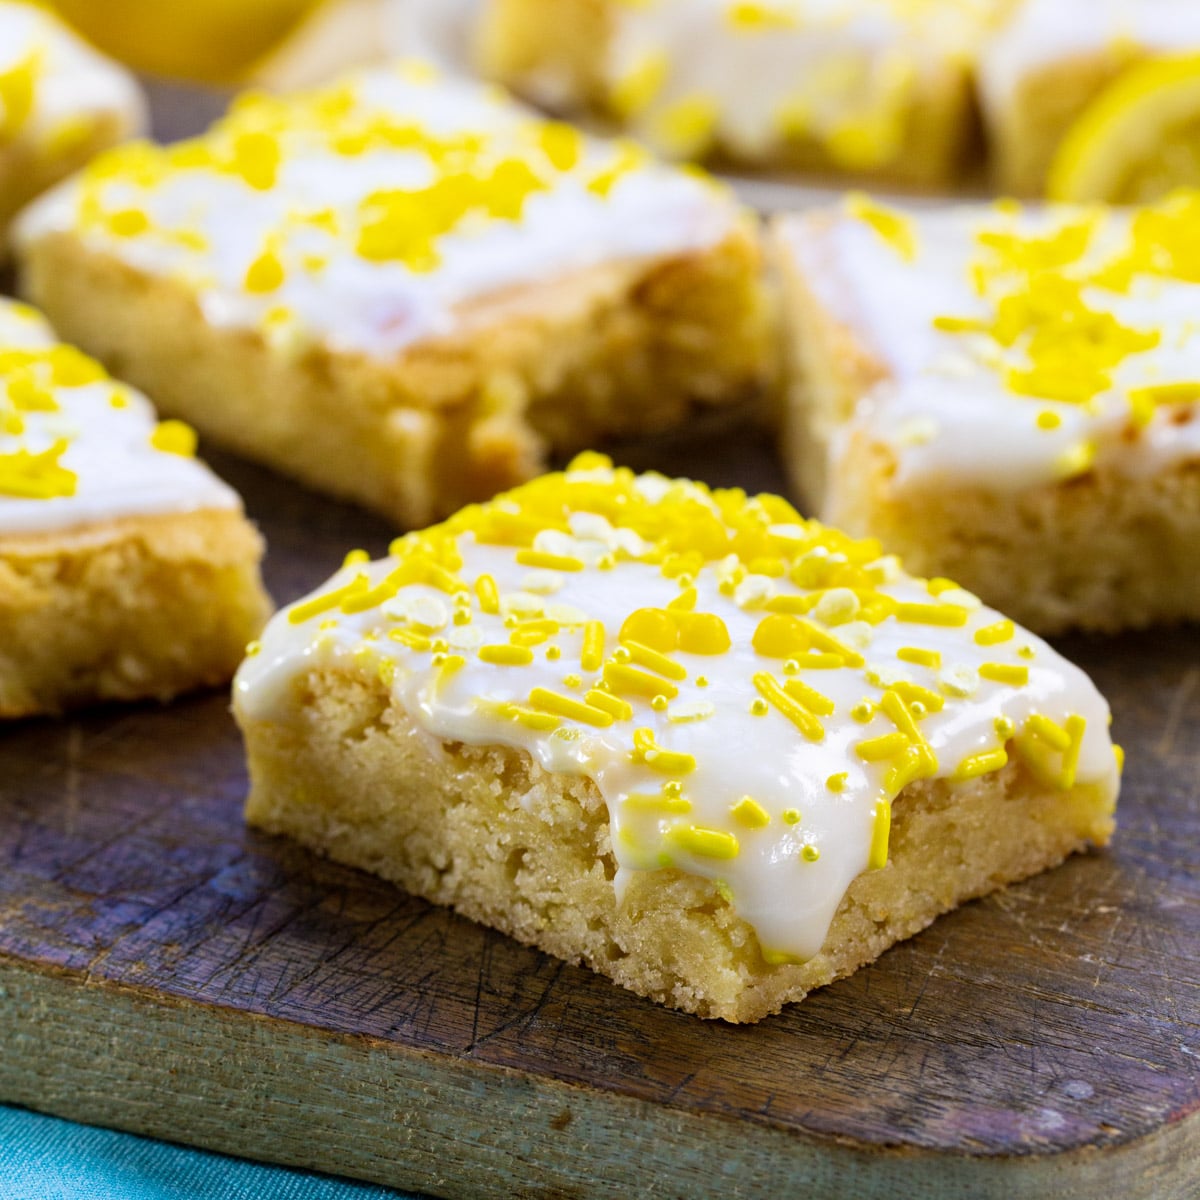 Lemon Cookie Bars topped with yellow sprinkles on a wood cutting board.